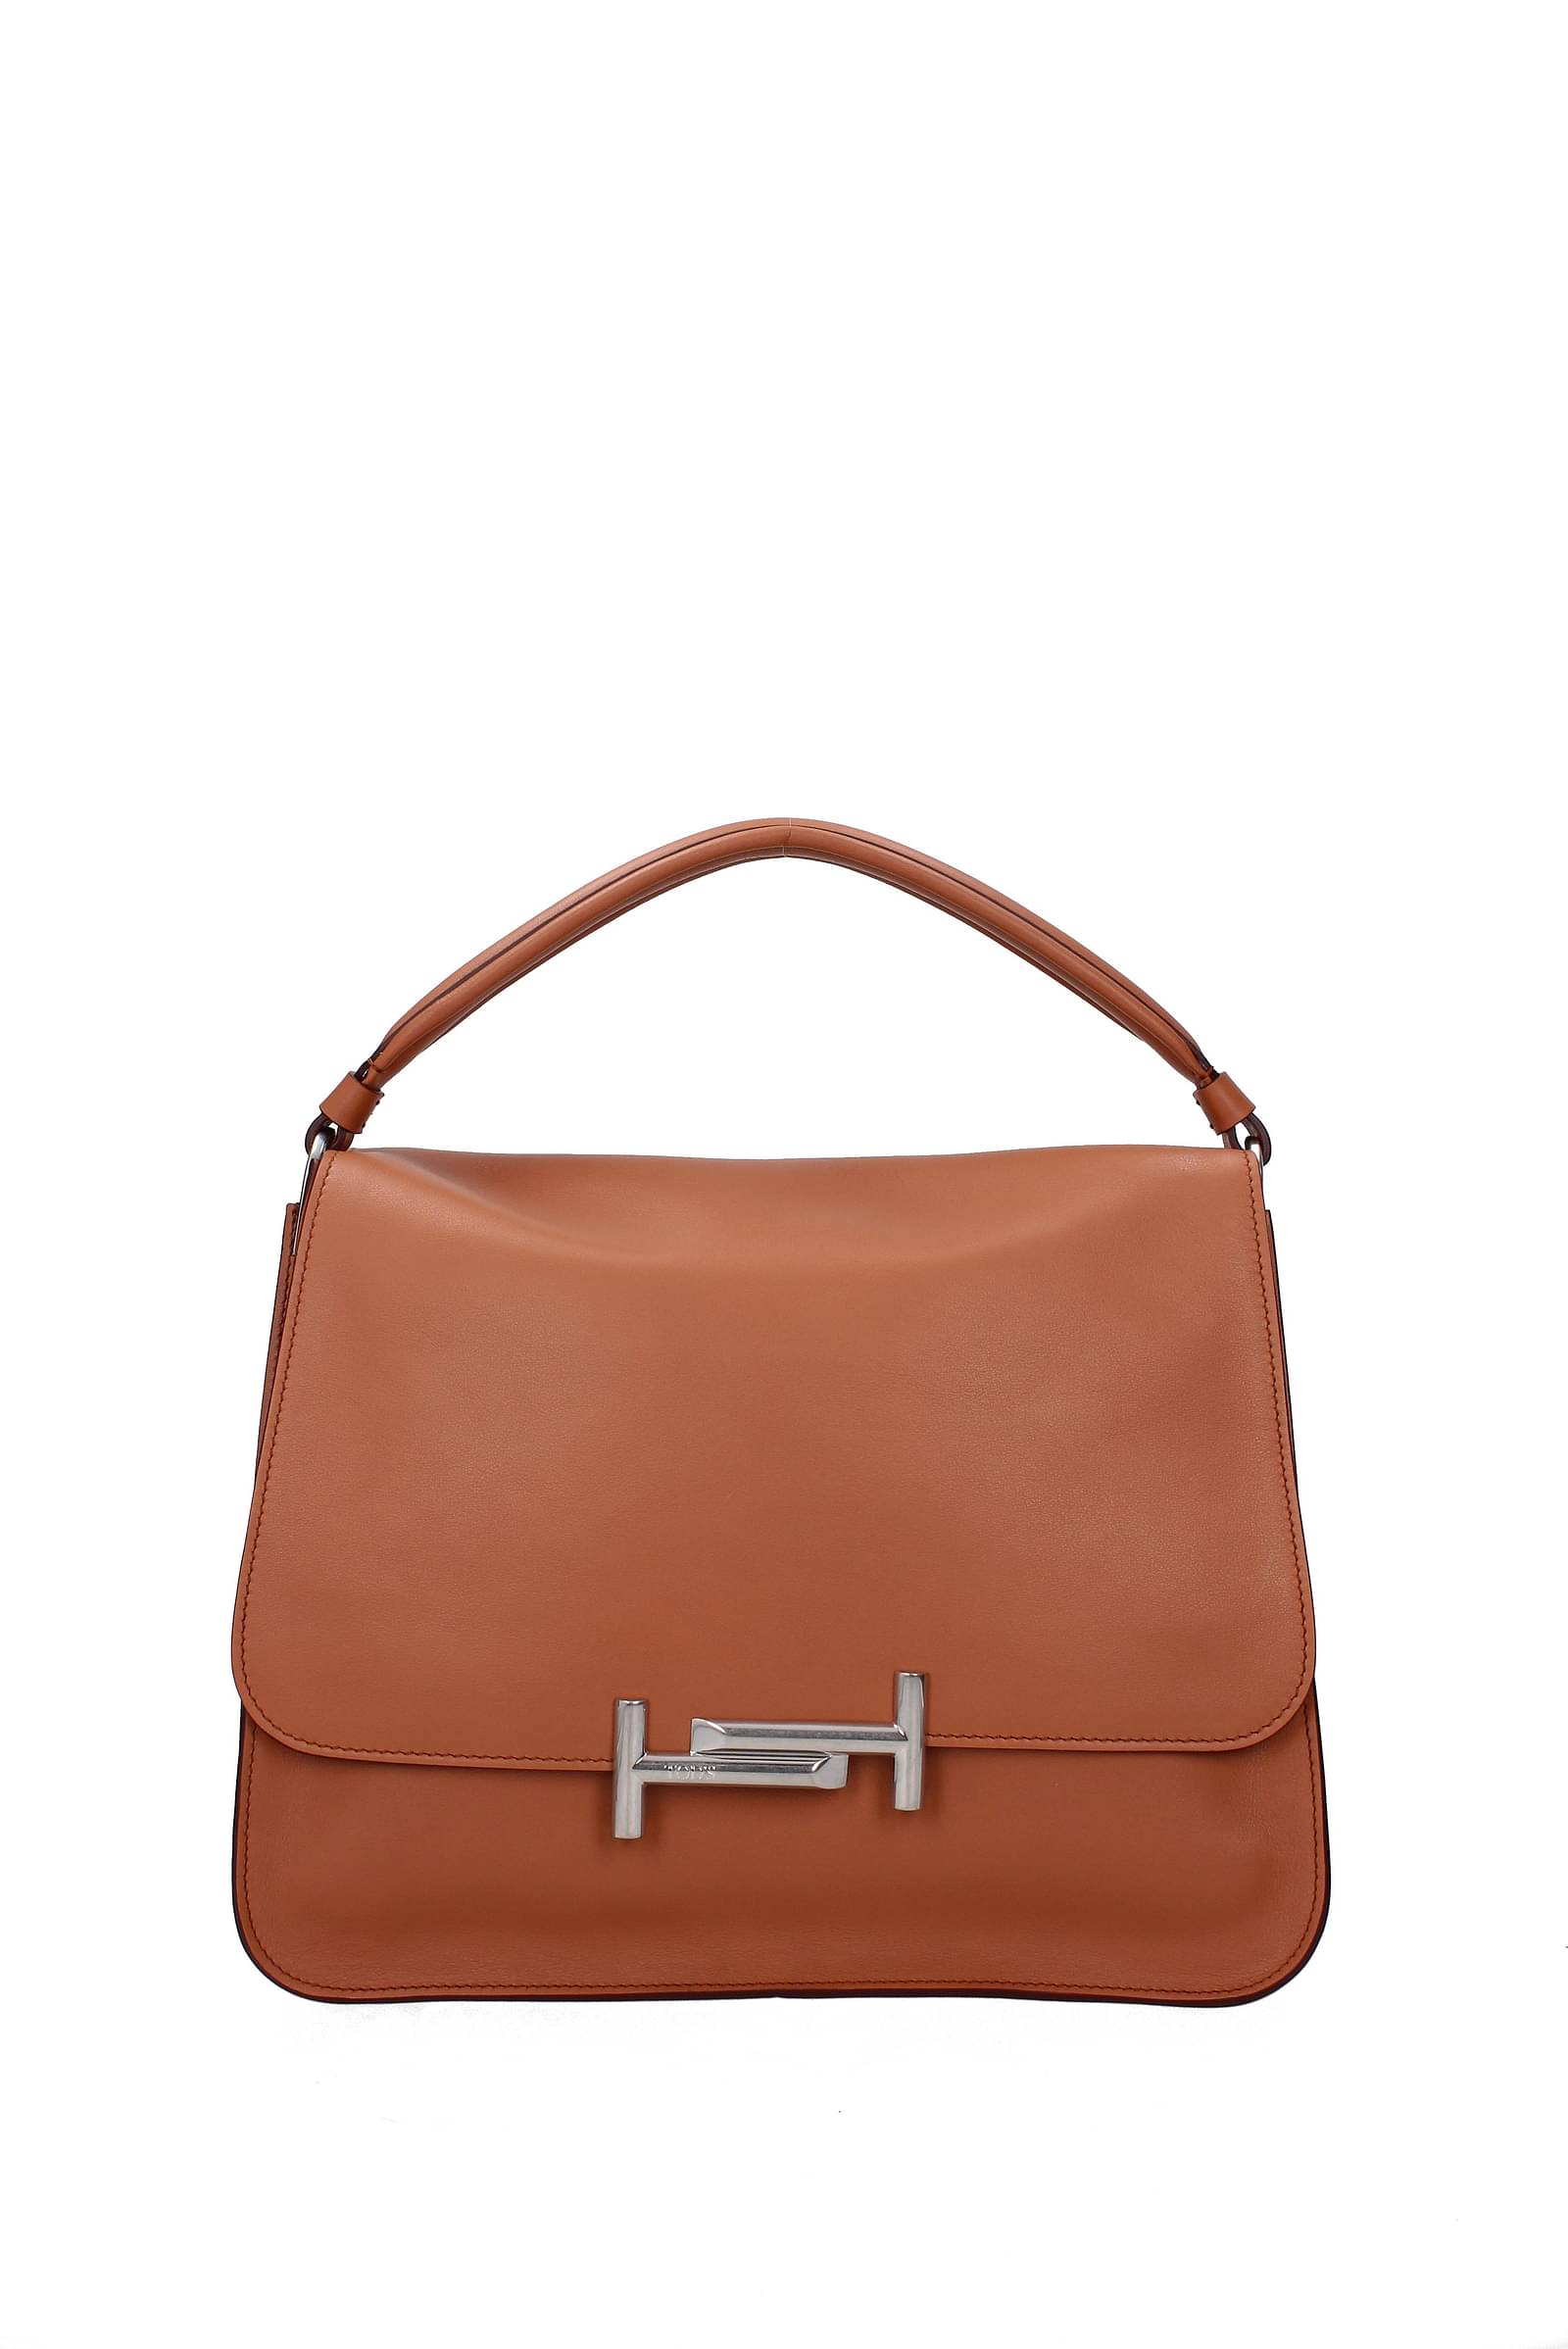 tods handbags outlet